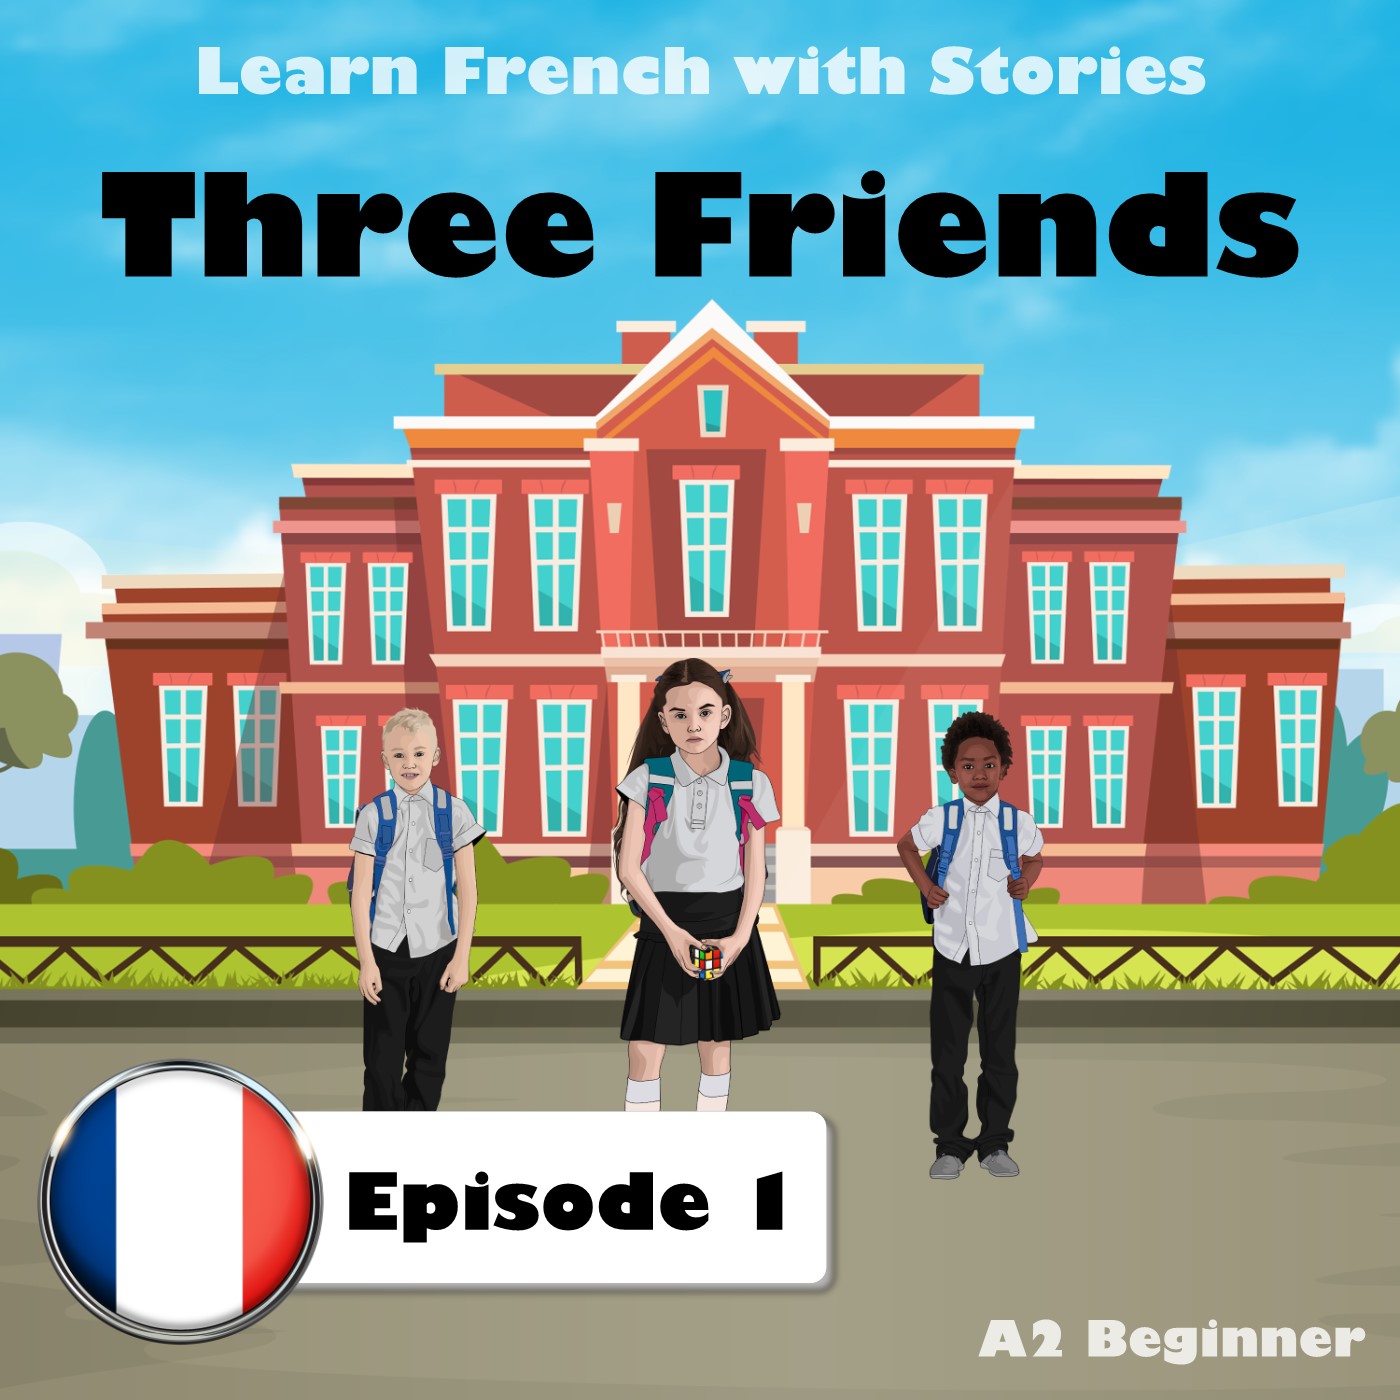 Learn French with Stories: Three Friends, Episode 1 (A2 Beginner)